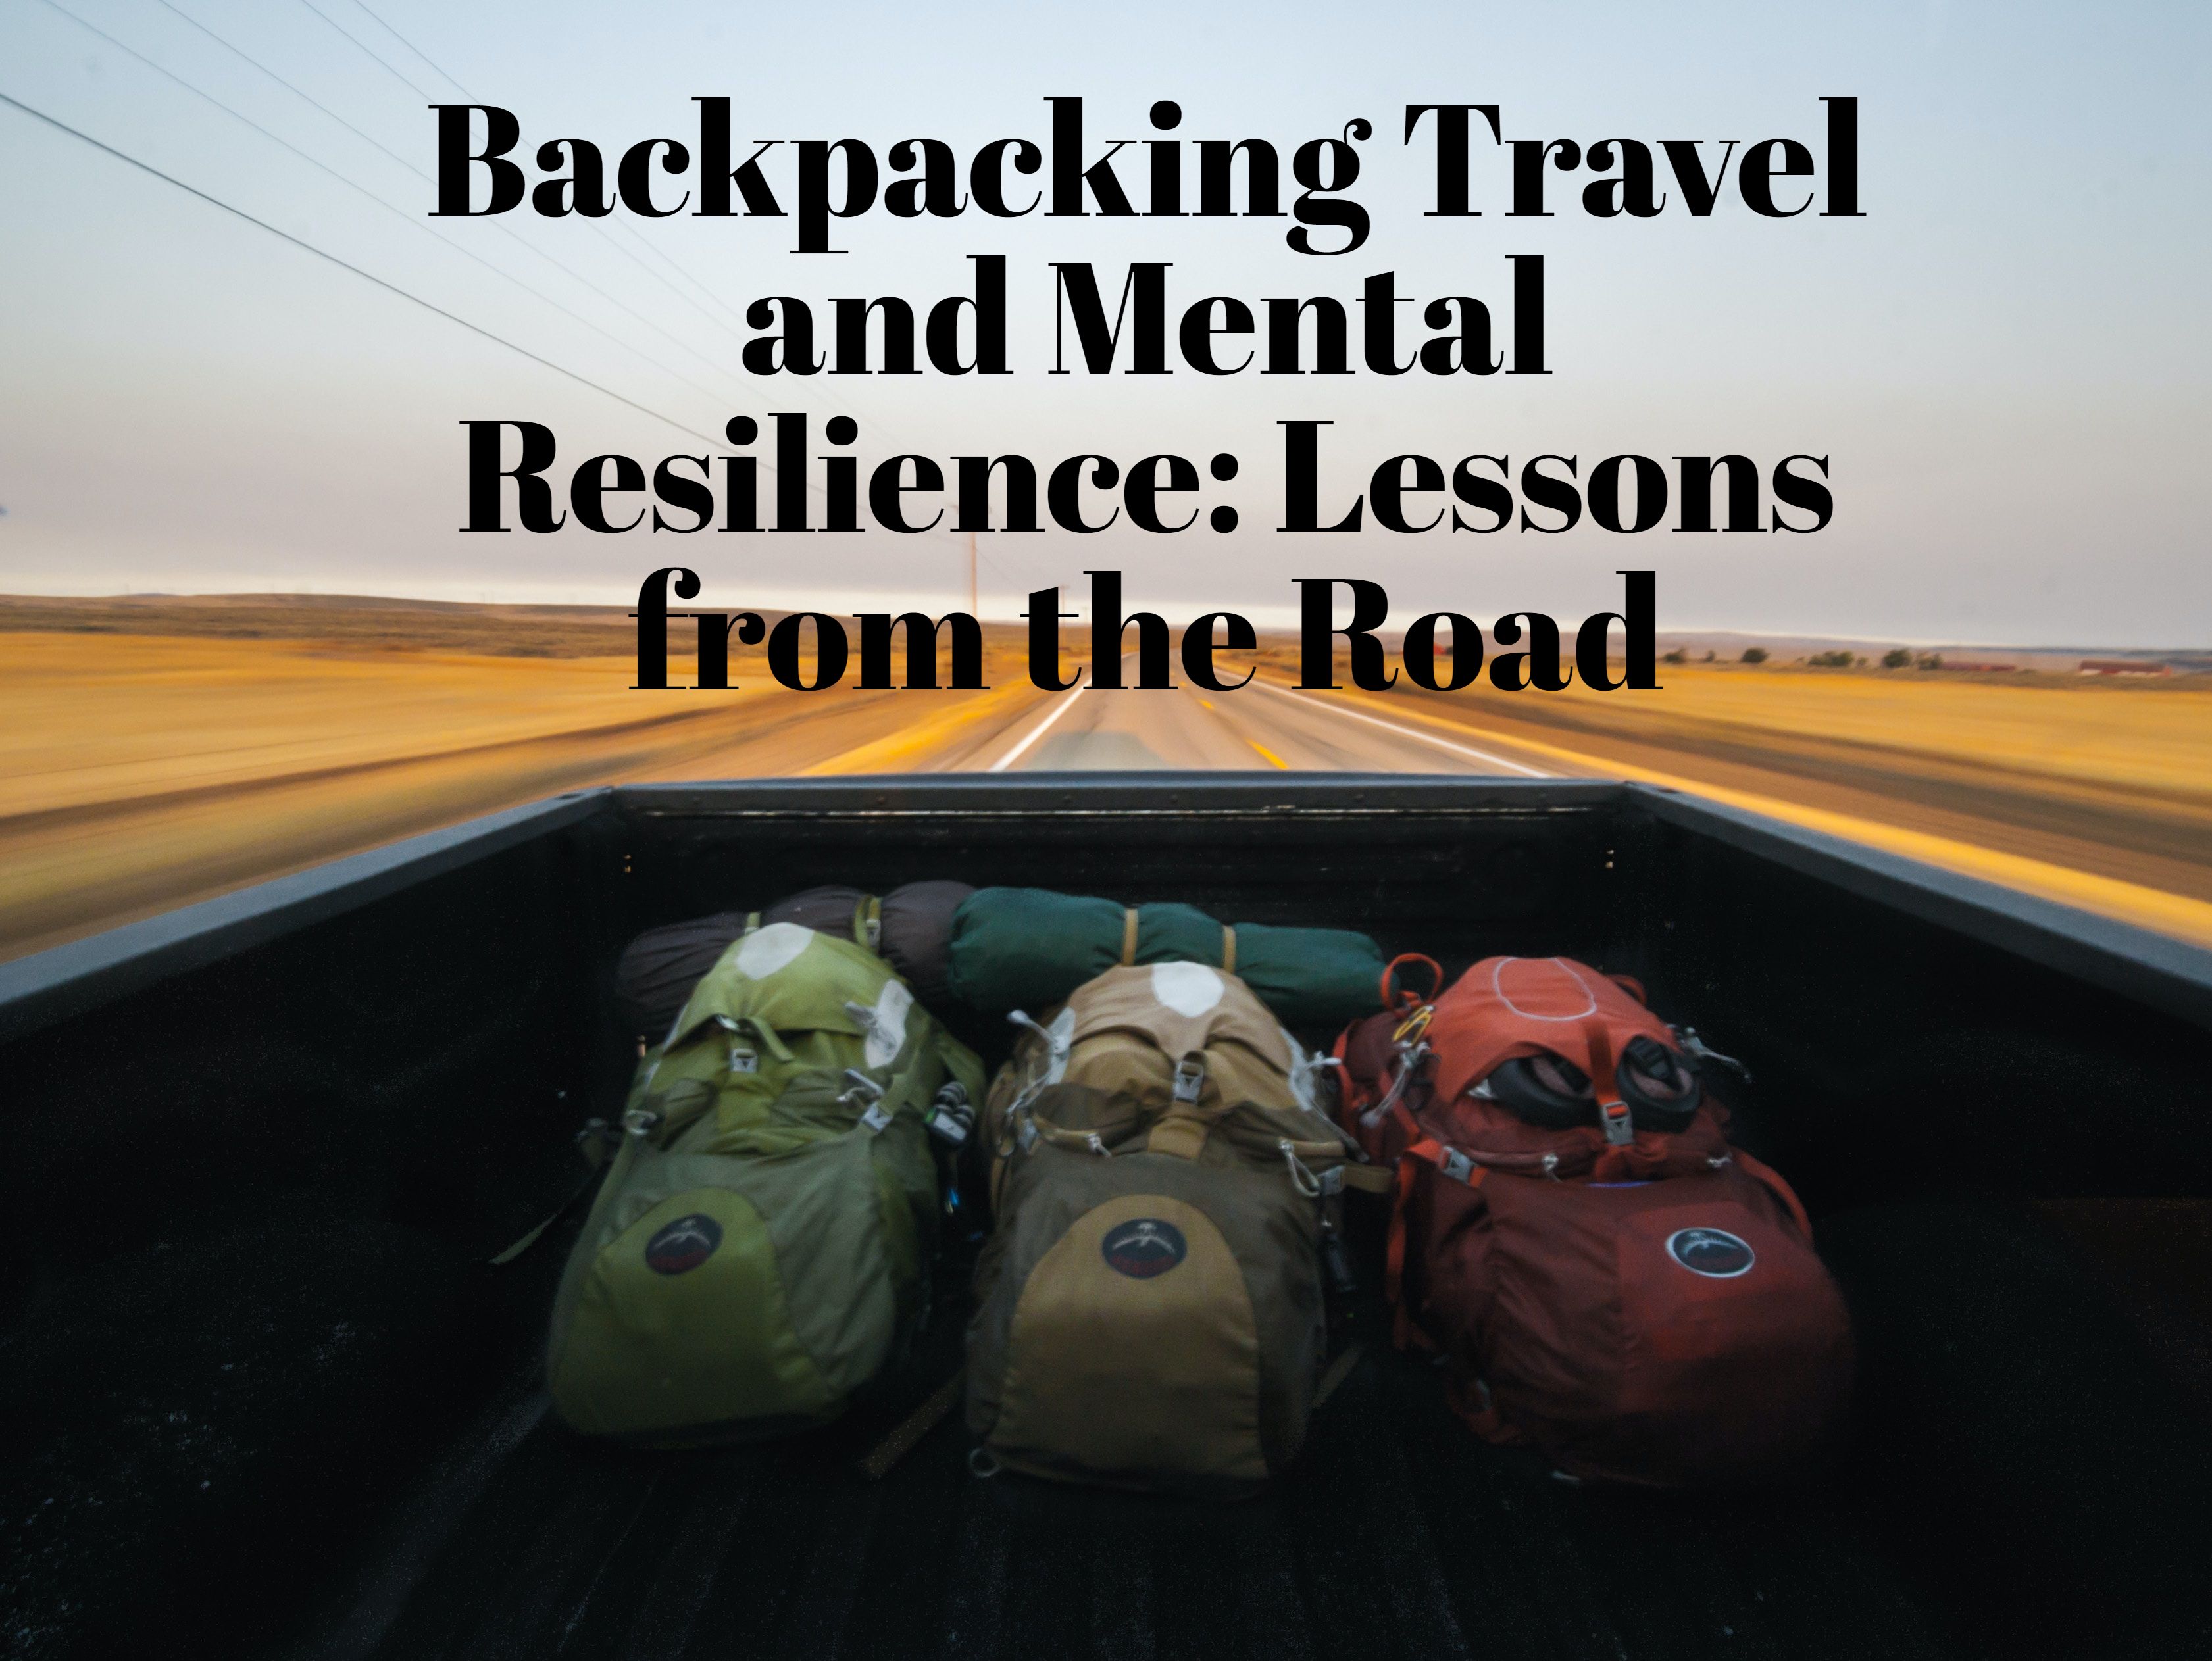 Backpacking and Mental Resilience: Lessons from the Road